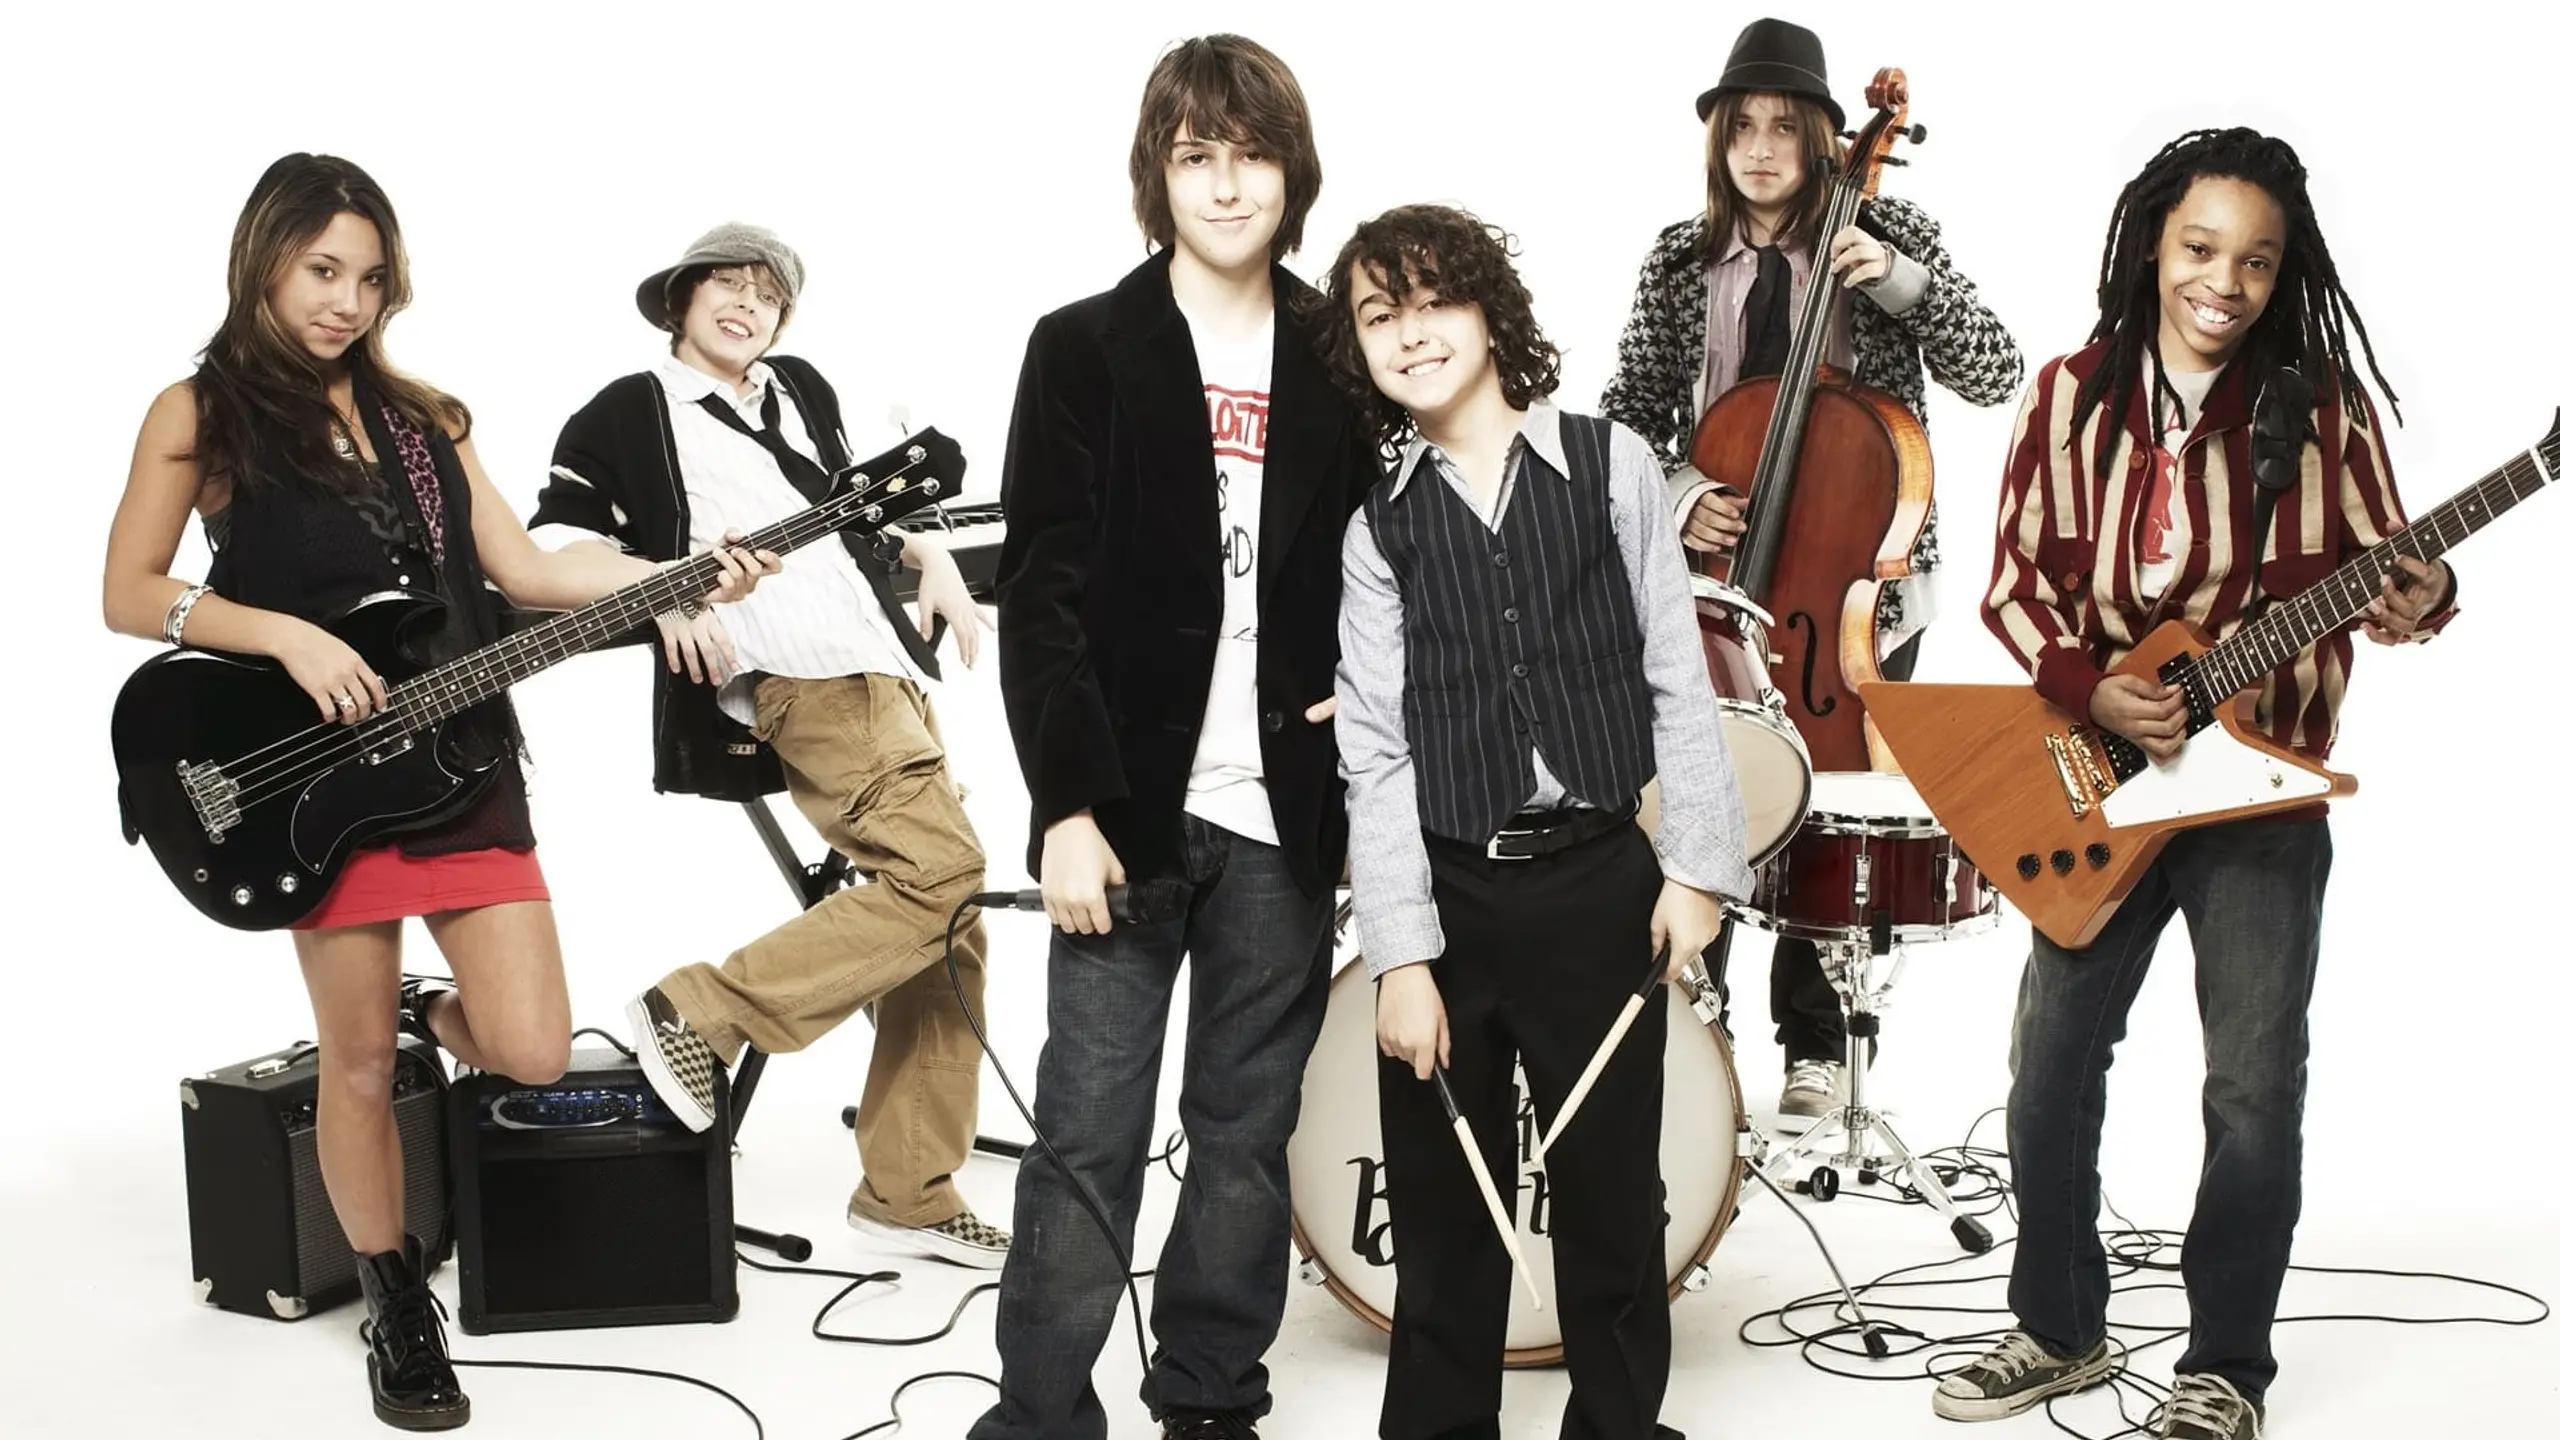 The Naked Brothers Band: Junge Rockstars privat